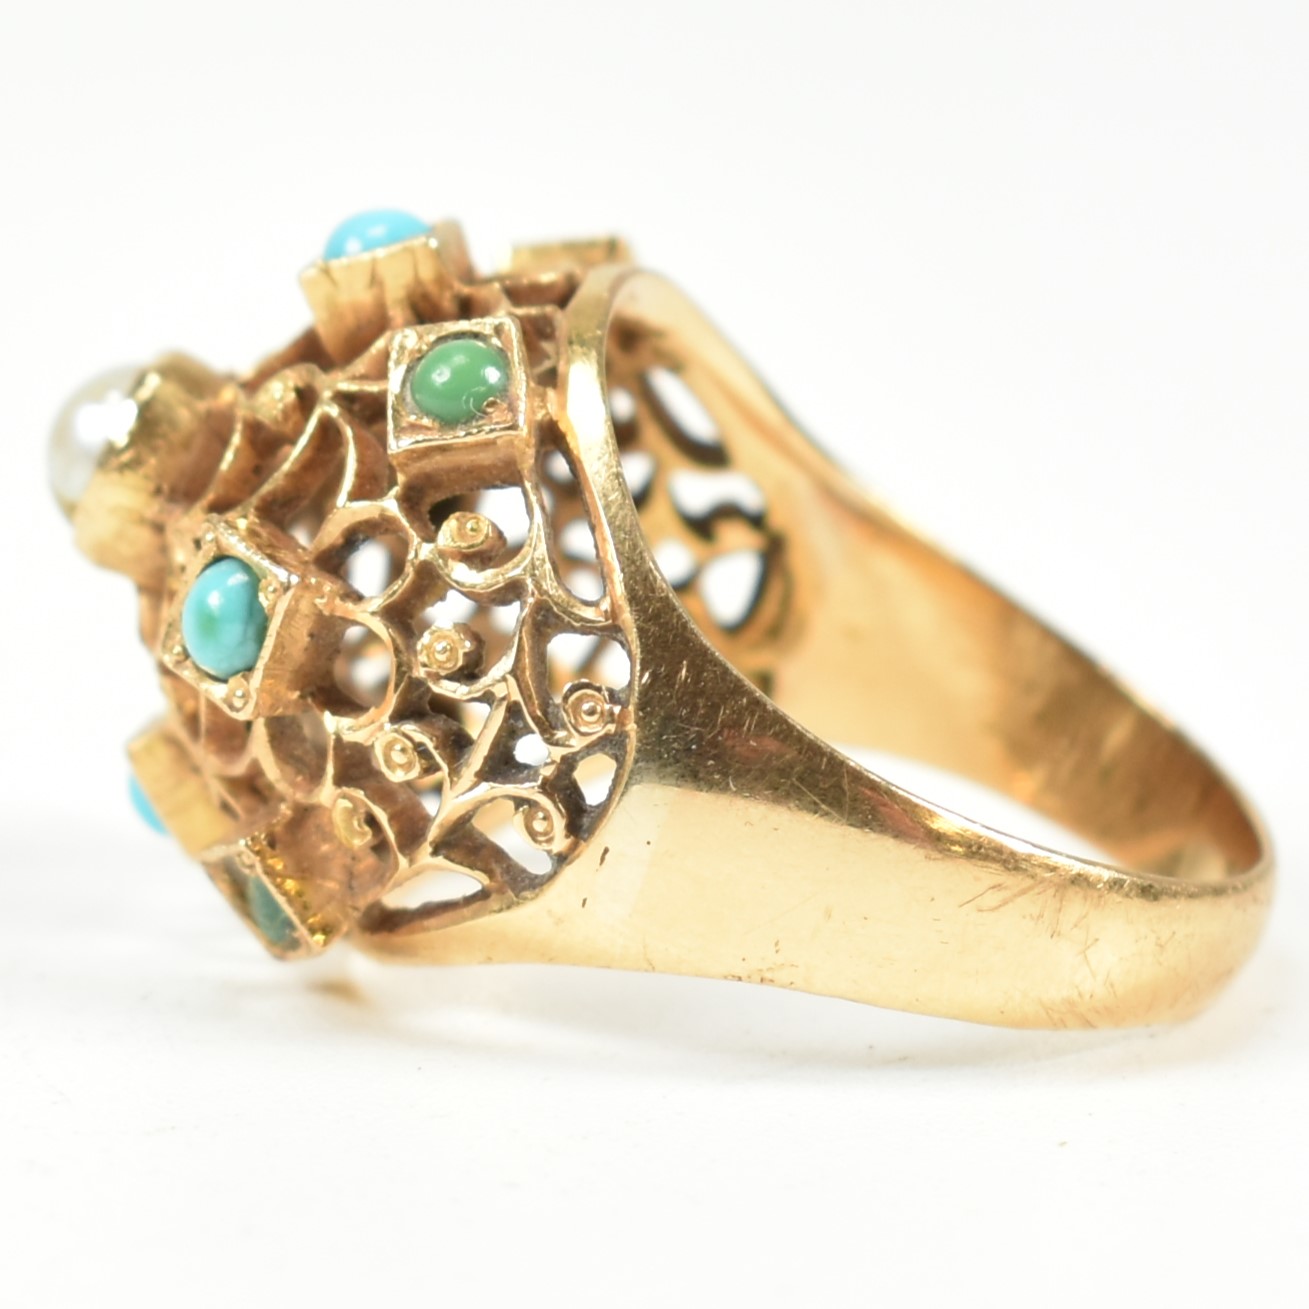 18CT GOLD & TURQUOISE BOMBE RING - Image 7 of 10